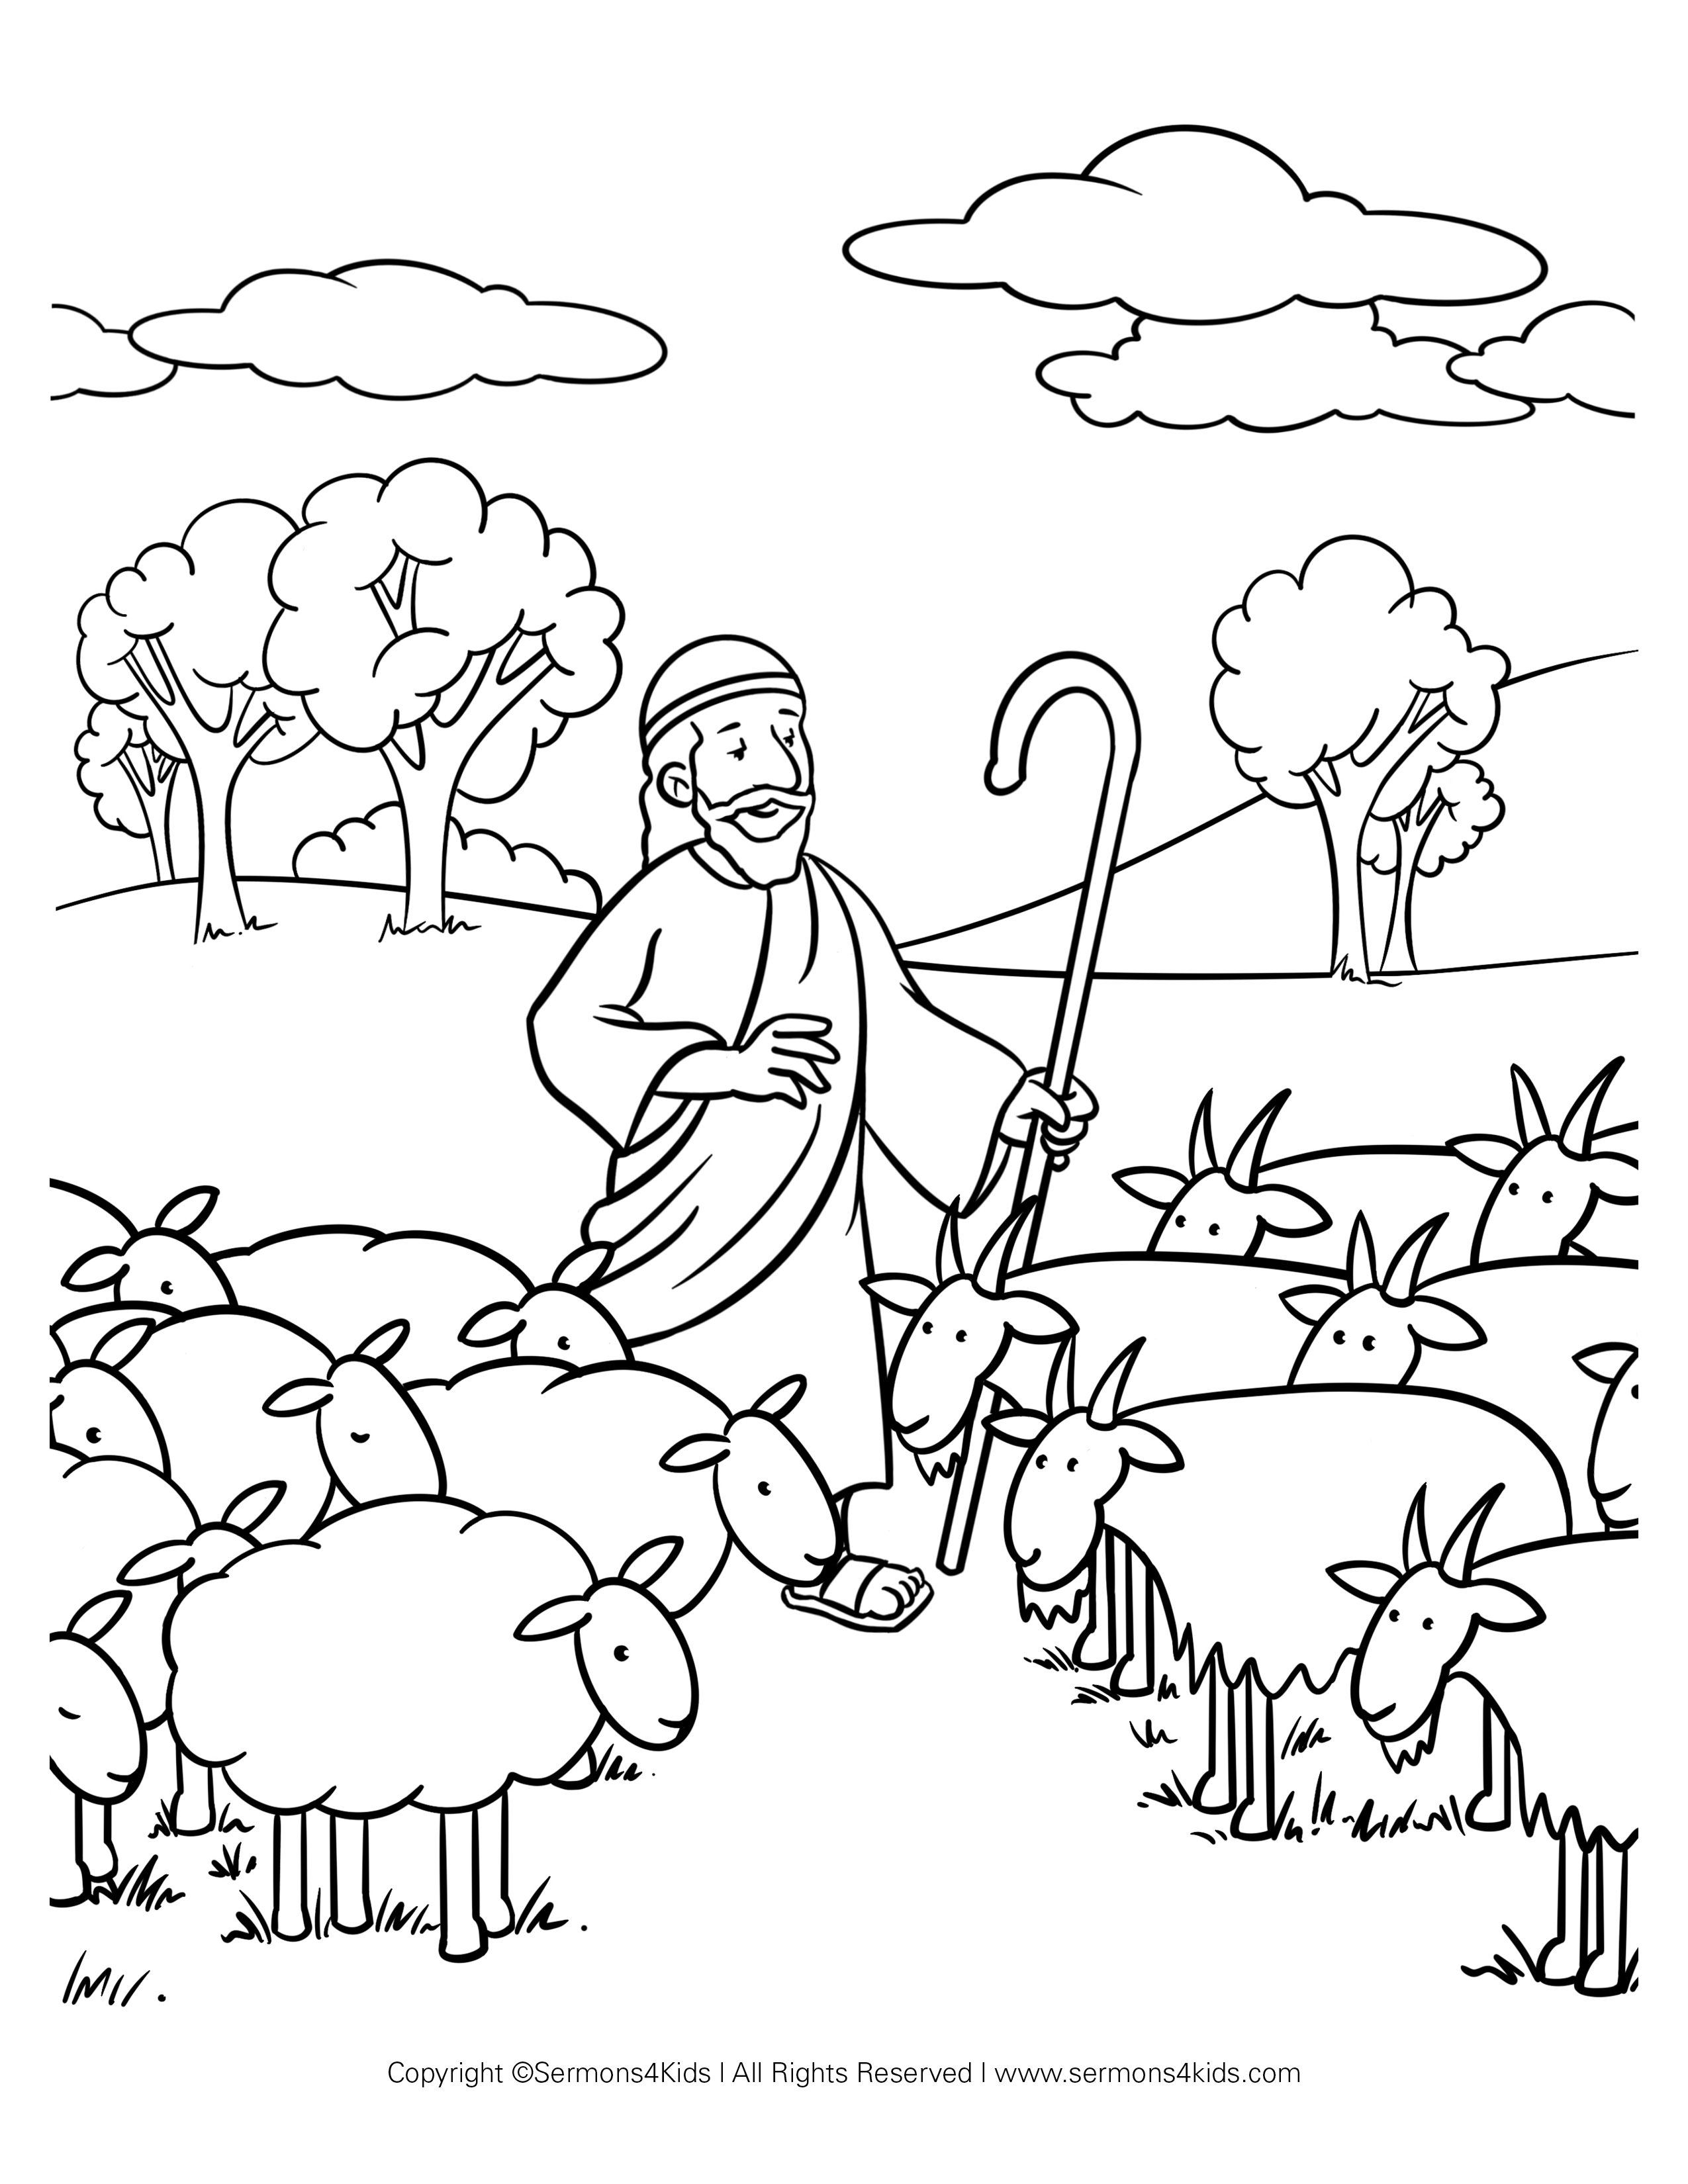 Sheep And Shepherd Coloring Page